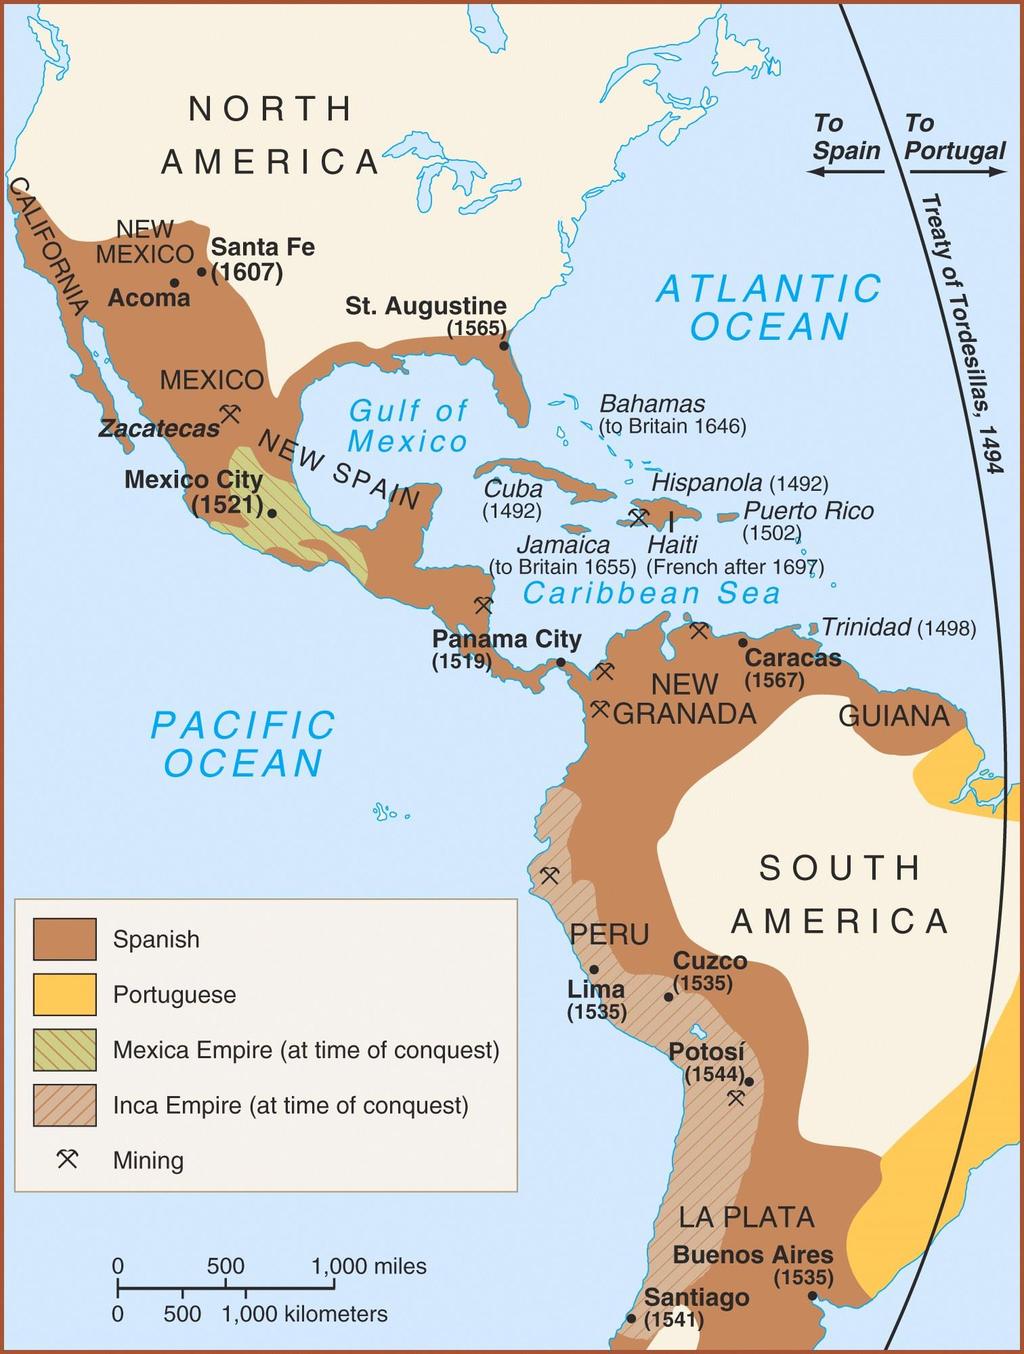 Spanish empire by the 1600 s consisted of the part of North